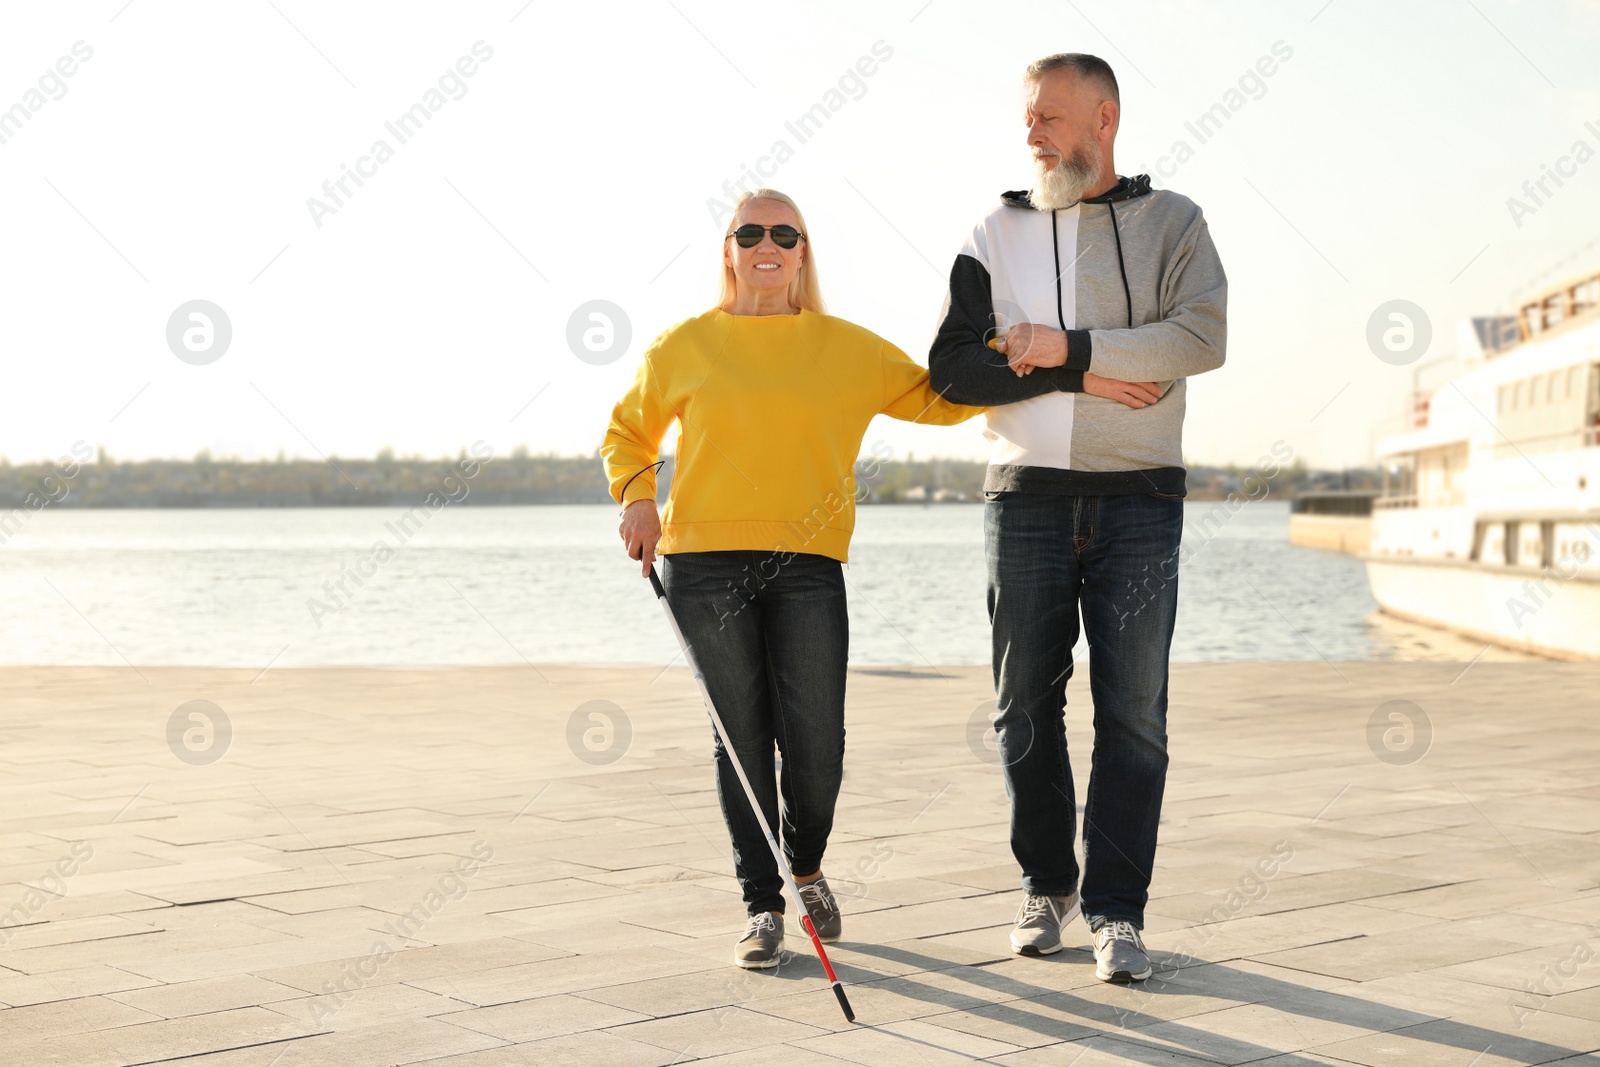 Photo of Mature man helping blind person with long cane in city